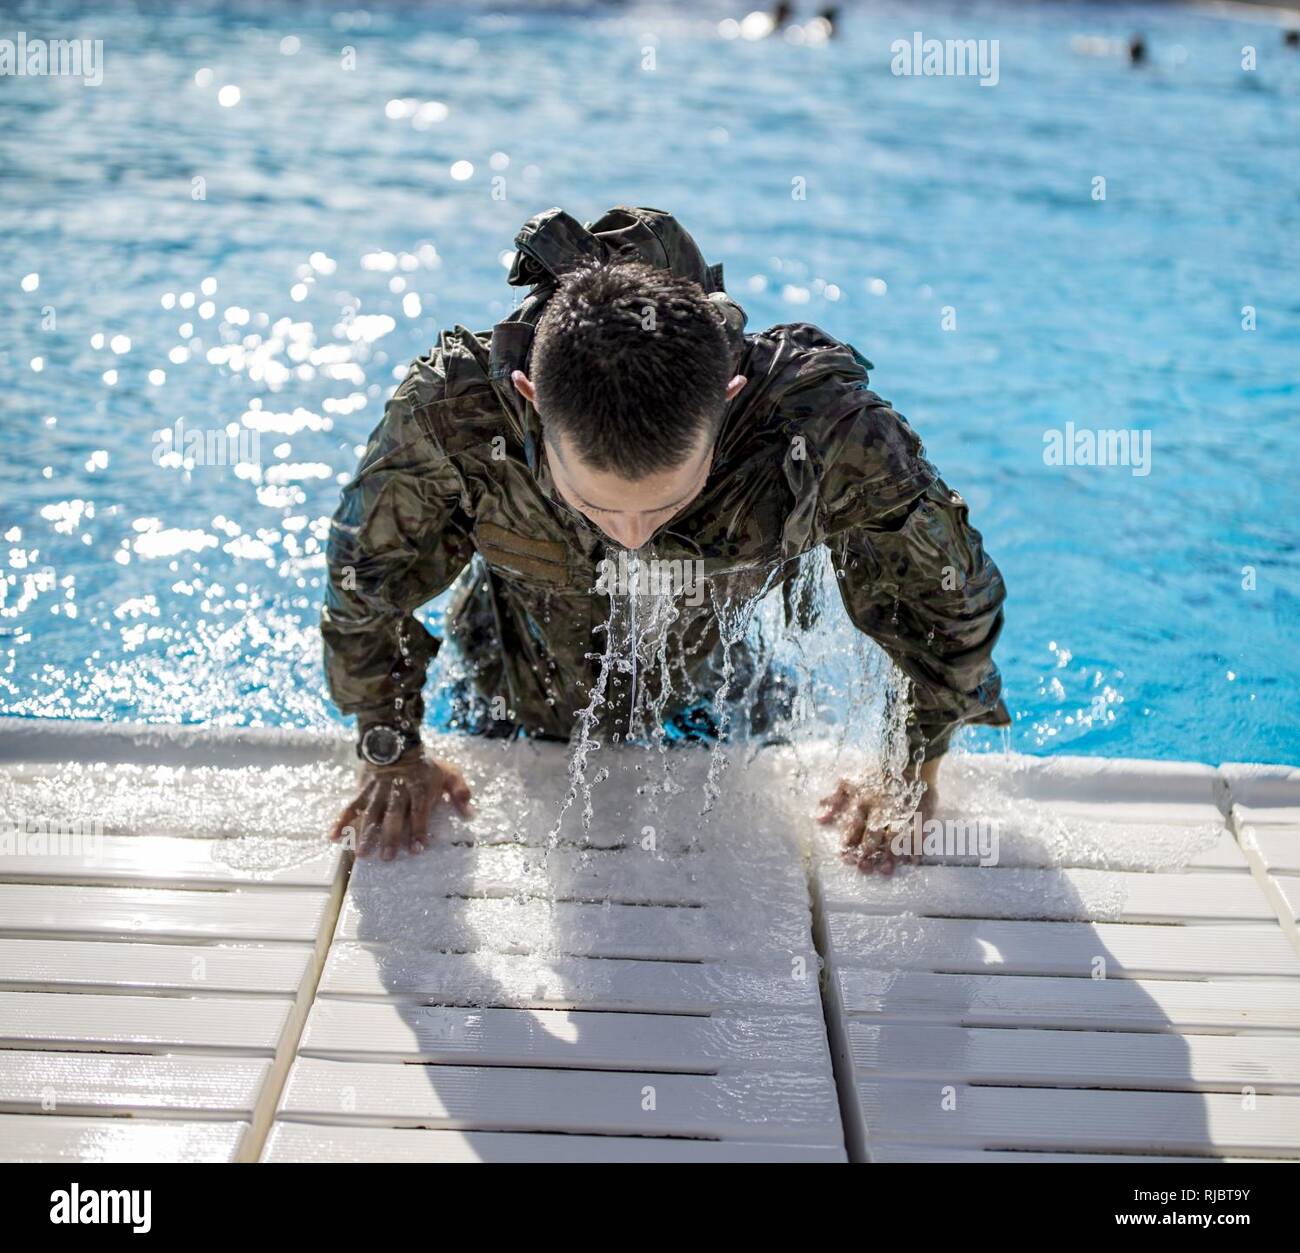 MARINE CORPS BASE CAMP PENDLETON, Calif. – A Japan Ground Self Defense Force soldier leaves a pool during a Marine Corps intermediate swim qualification as part of exercise Iron Fist Jan. 16, 2018. Iron Fist brings together U.S. Marines from the 11th Marine Expeditionary Unit and Soldiers from the Japan Ground Self Defense Force, Western Army Infantry Regiment, to improve bilateral planning, communicating, and conduct combined amphibious operations. Stock Photo